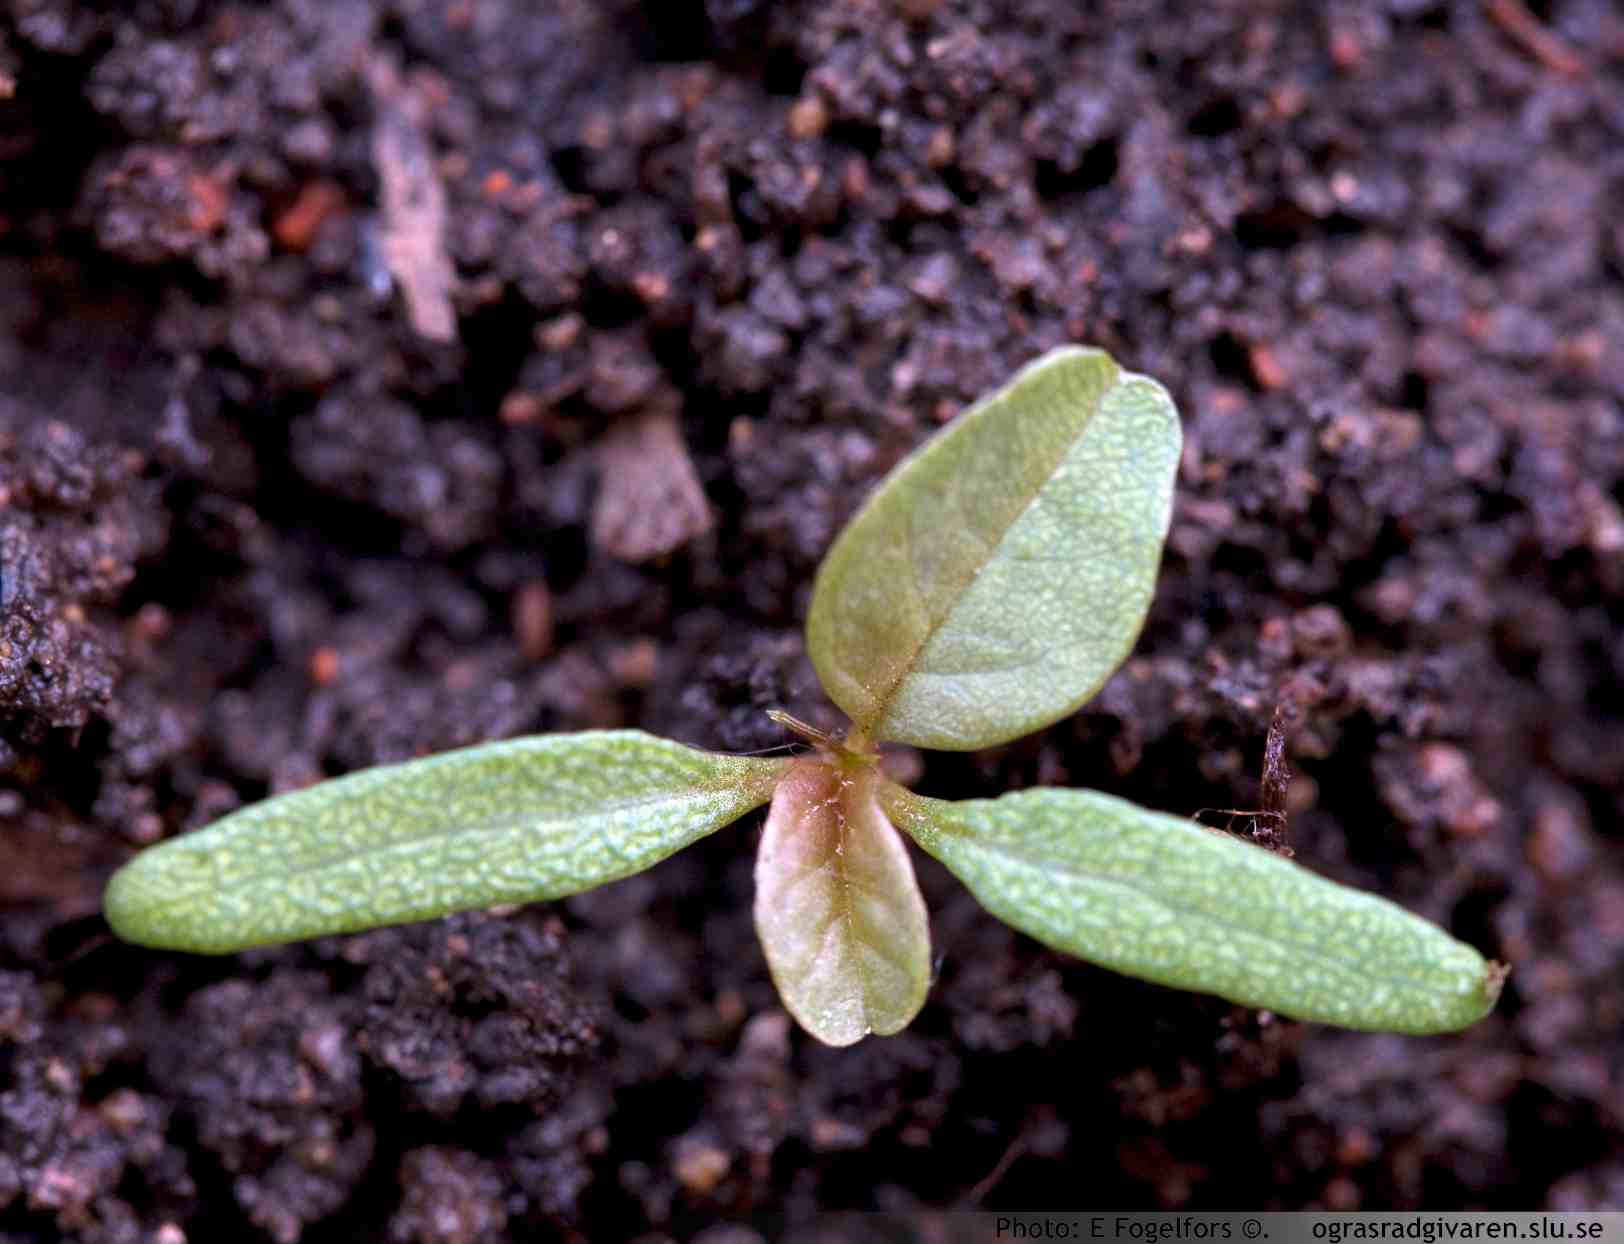 Seedling with first true leaf.